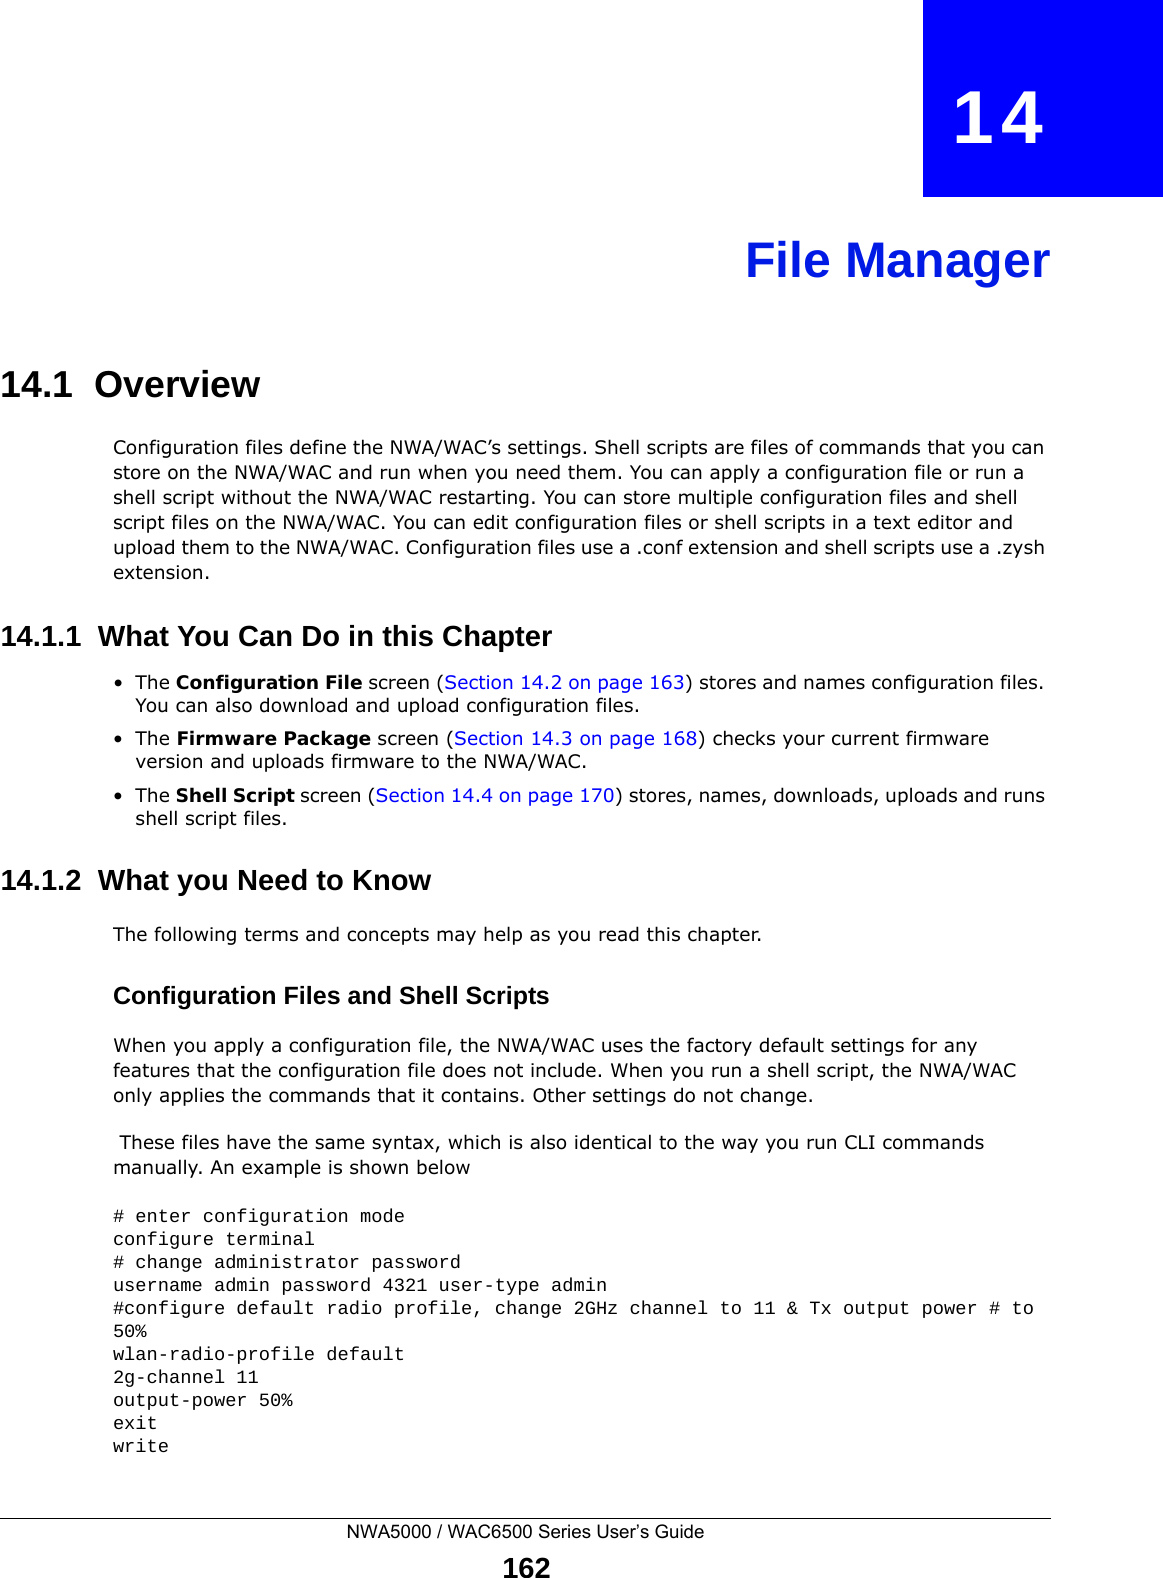 NWA5000 / WAC6500 Series User’s Guide162CHAPTER   14File Manager14.1  OverviewConfiguration files define the NWA/WAC’s settings. Shell scripts are files of commands that you can store on the NWA/WAC and run when you need them. You can apply a configuration file or run a shell script without the NWA/WAC restarting. You can store multiple configuration files and shell script files on the NWA/WAC. You can edit configuration files or shell scripts in a text editor and upload them to the NWA/WAC. Configuration files use a .conf extension and shell scripts use a .zysh extension.14.1.1  What You Can Do in this Chapter•The Configuration File screen (Section 14.2 on page 163) stores and names configuration files. You can also download and upload configuration files.•The Firmware Package screen (Section 14.3 on page 168) checks your current firmware version and uploads firmware to the NWA/WAC.•The Shell Script screen (Section 14.4 on page 170) stores, names, downloads, uploads and runs shell script files. 14.1.2  What you Need to KnowThe following terms and concepts may help as you read this chapter.Configuration Files and Shell ScriptsWhen you apply a configuration file, the NWA/WAC uses the factory default settings for any features that the configuration file does not include. When you run a shell script, the NWA/WAC only applies the commands that it contains. Other settings do not change. These files have the same syntax, which is also identical to the way you run CLI commands manually. An example is shown below# enter configuration modeconfigure terminal# change administrator passwordusername admin password 4321 user-type admin#configure default radio profile, change 2GHz channel to 11 &amp; Tx output power # to 50%wlan-radio-profile default2g-channel 11output-power 50%exitwrite